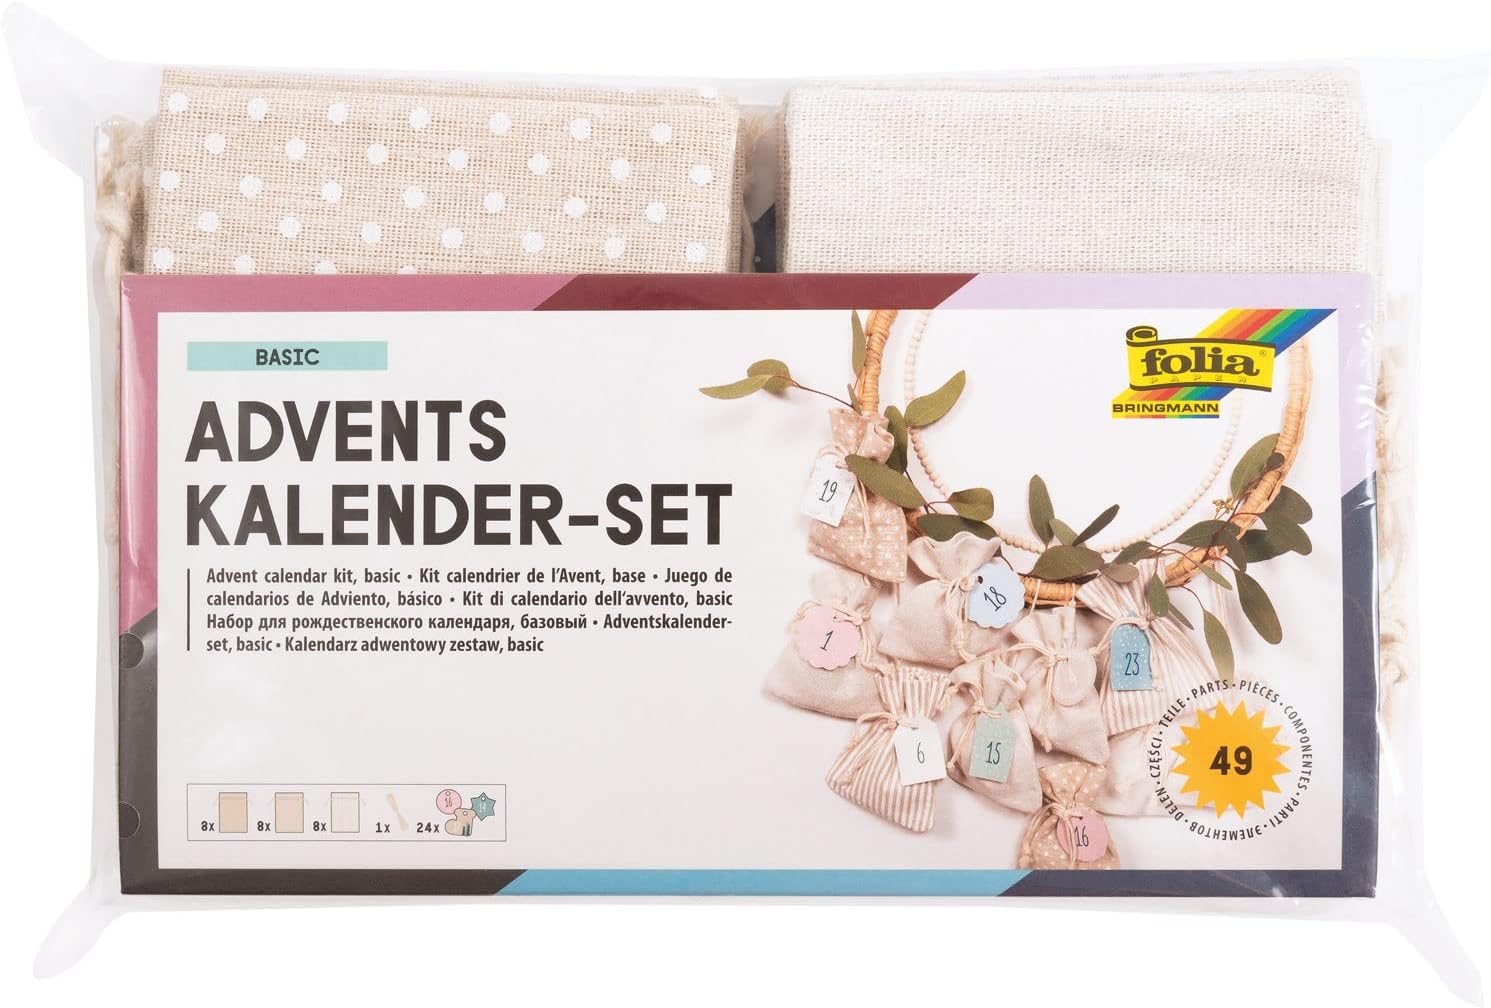 folia 64121 Advent Calendar Set, Basic with Motif Print, Approx. 10 x 13 cm, 24 Natural-Coloured Fabric Bags, Made of Cotton and Polyester, Includes Pendant and Yarn